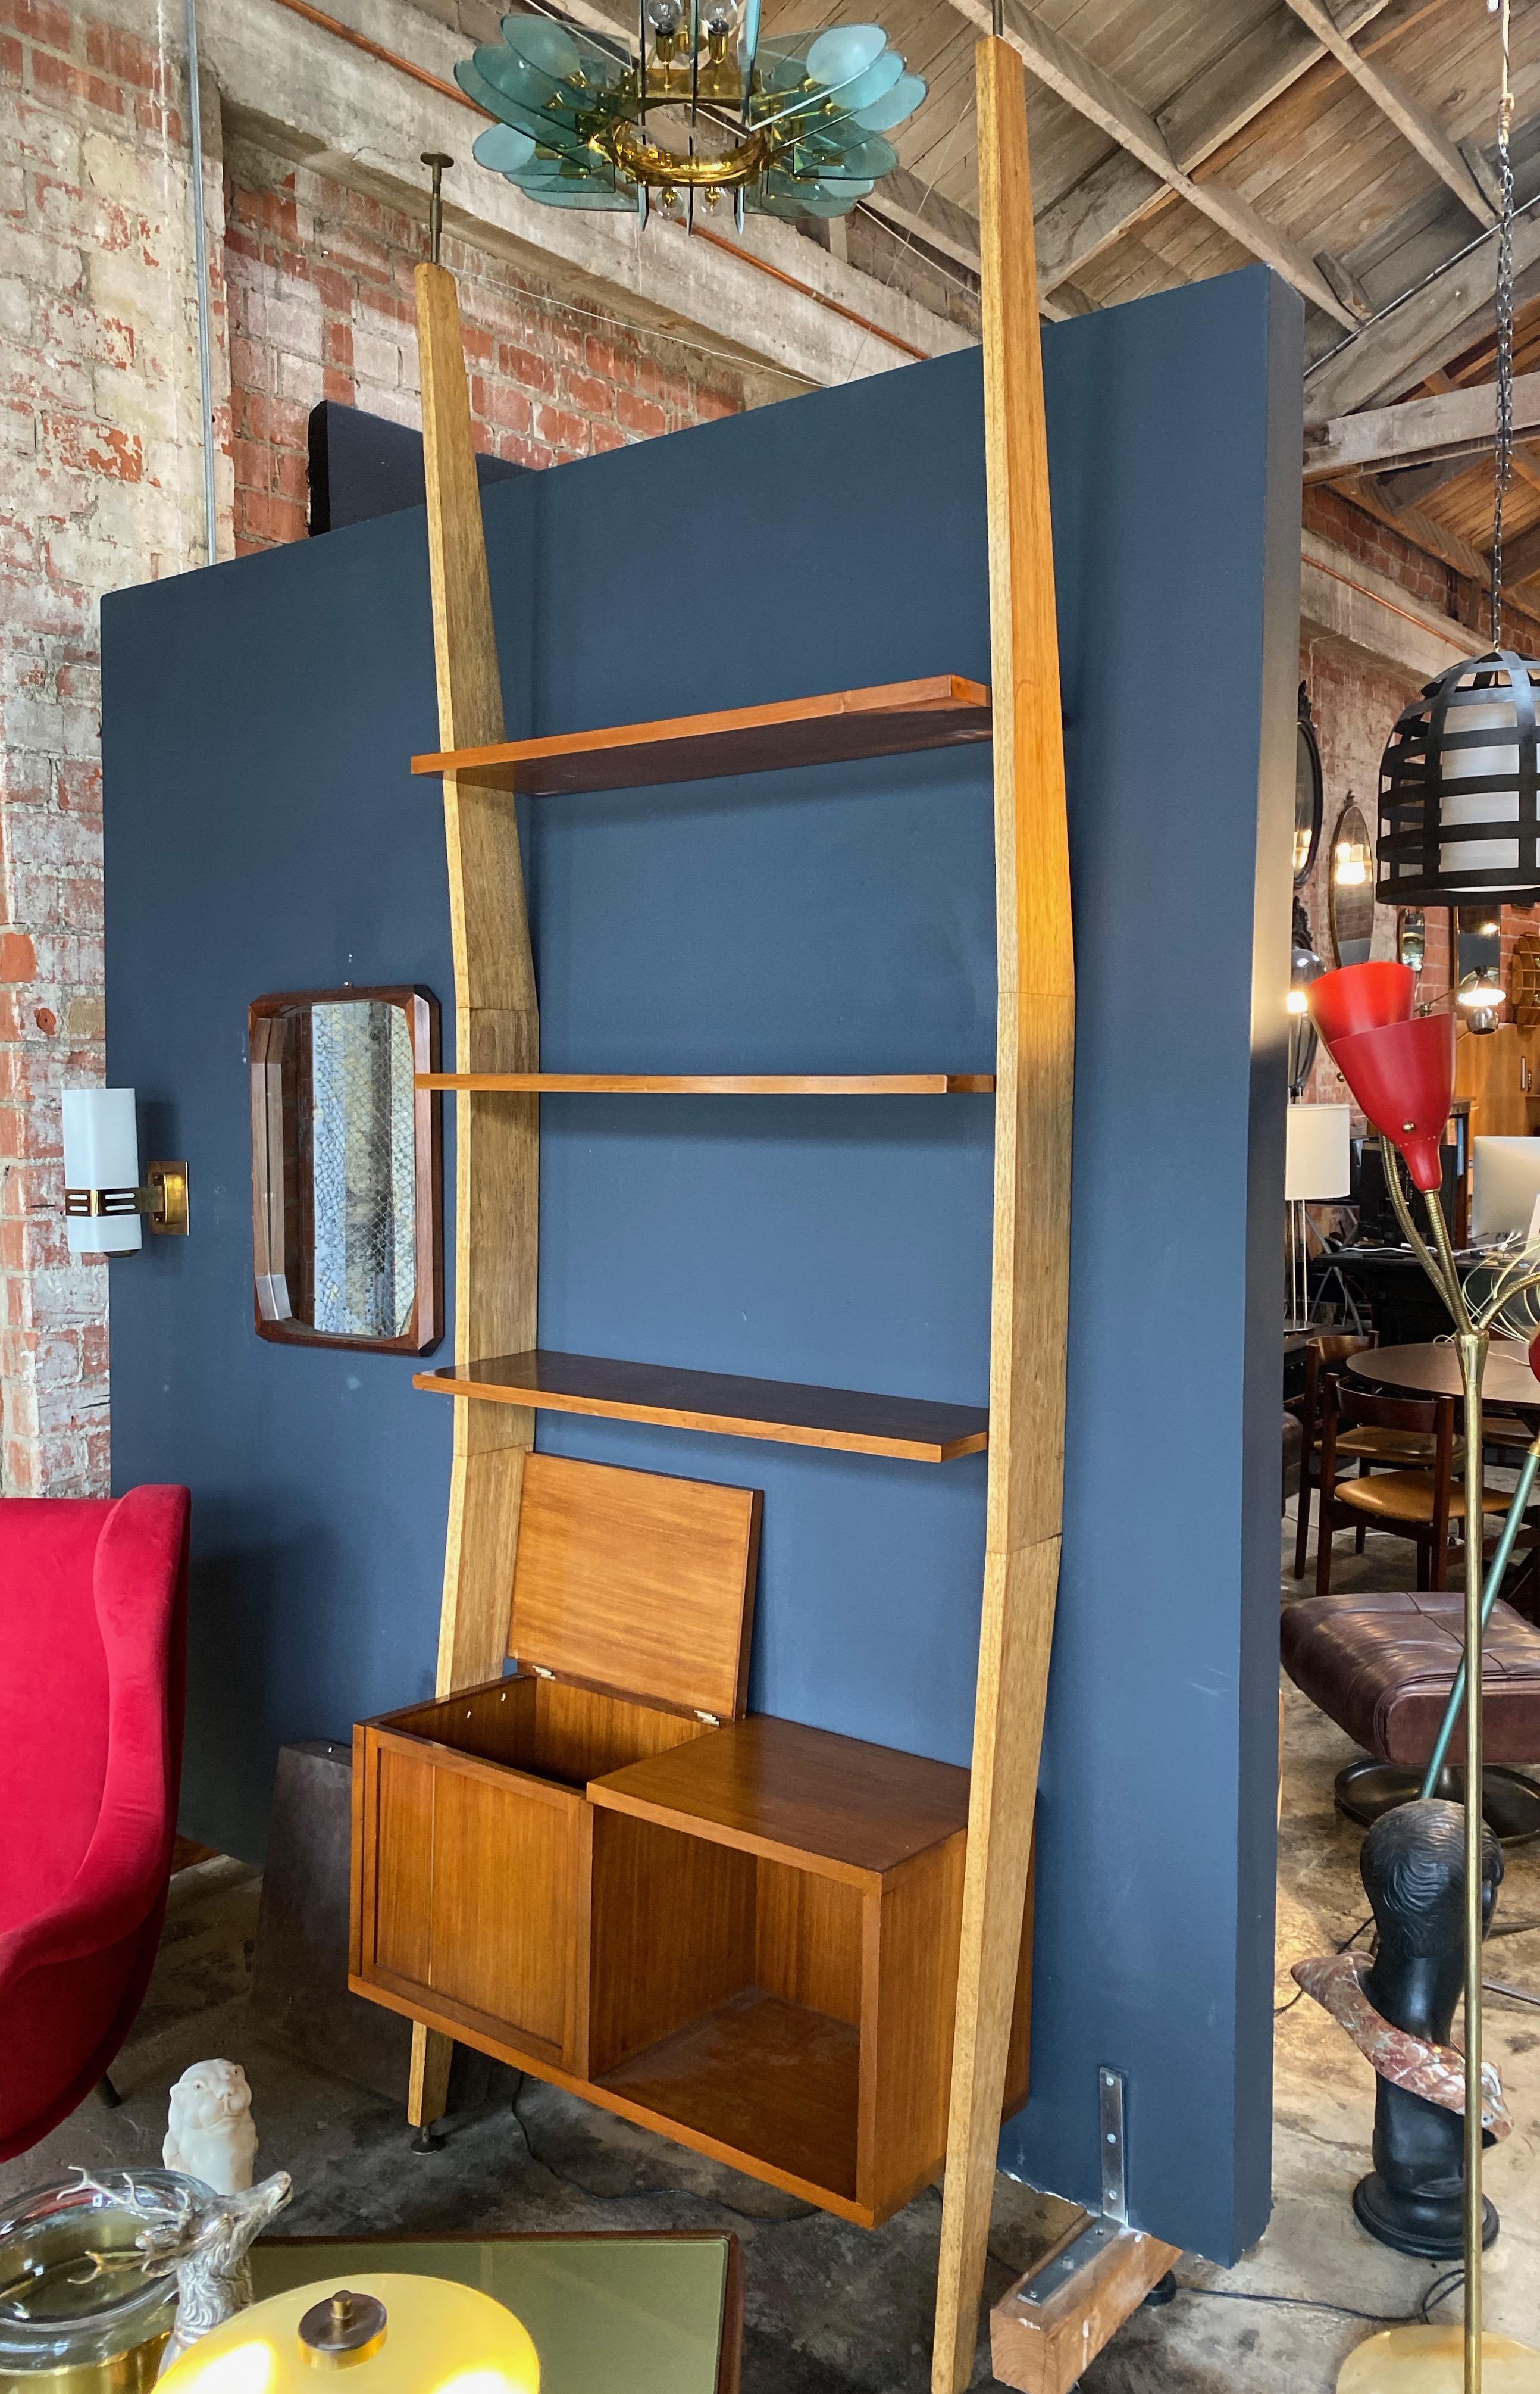 A particular shape for this bookshelf with brass adjustable feet designed by the architect Augusto Romano in 1950s.
It can be used also as a room divider or simply as a wall bookshelf. Better.
The lower body has two compartments one closed and